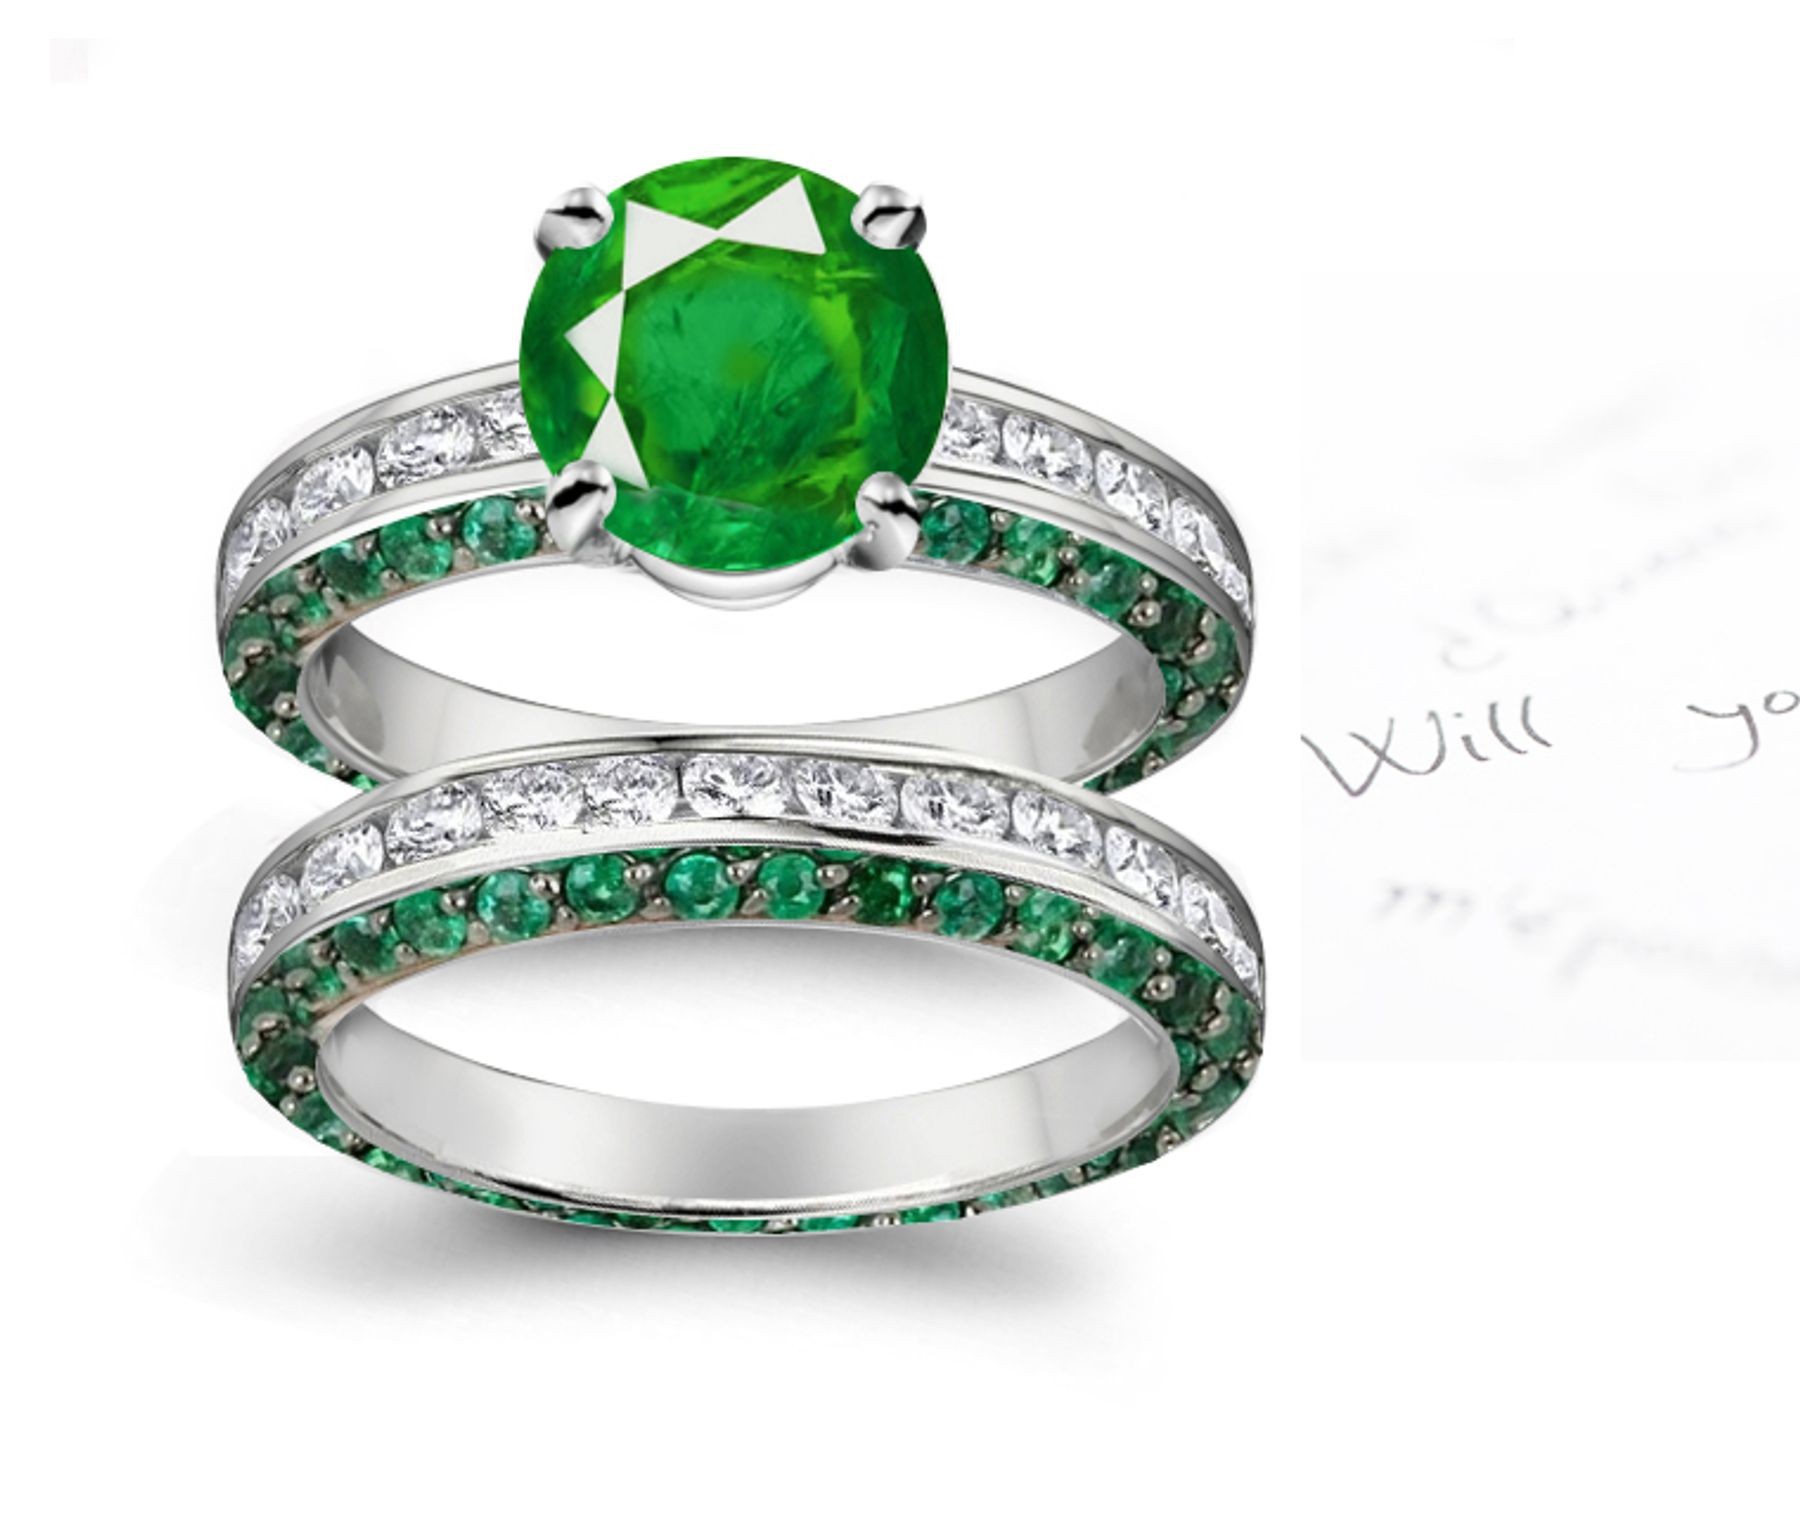 Legendary Pliny & Damigeron:Extrasensory Channel Set Brilliant Green Emerald Diamond Modern Ring Crafted in 14k White Gold